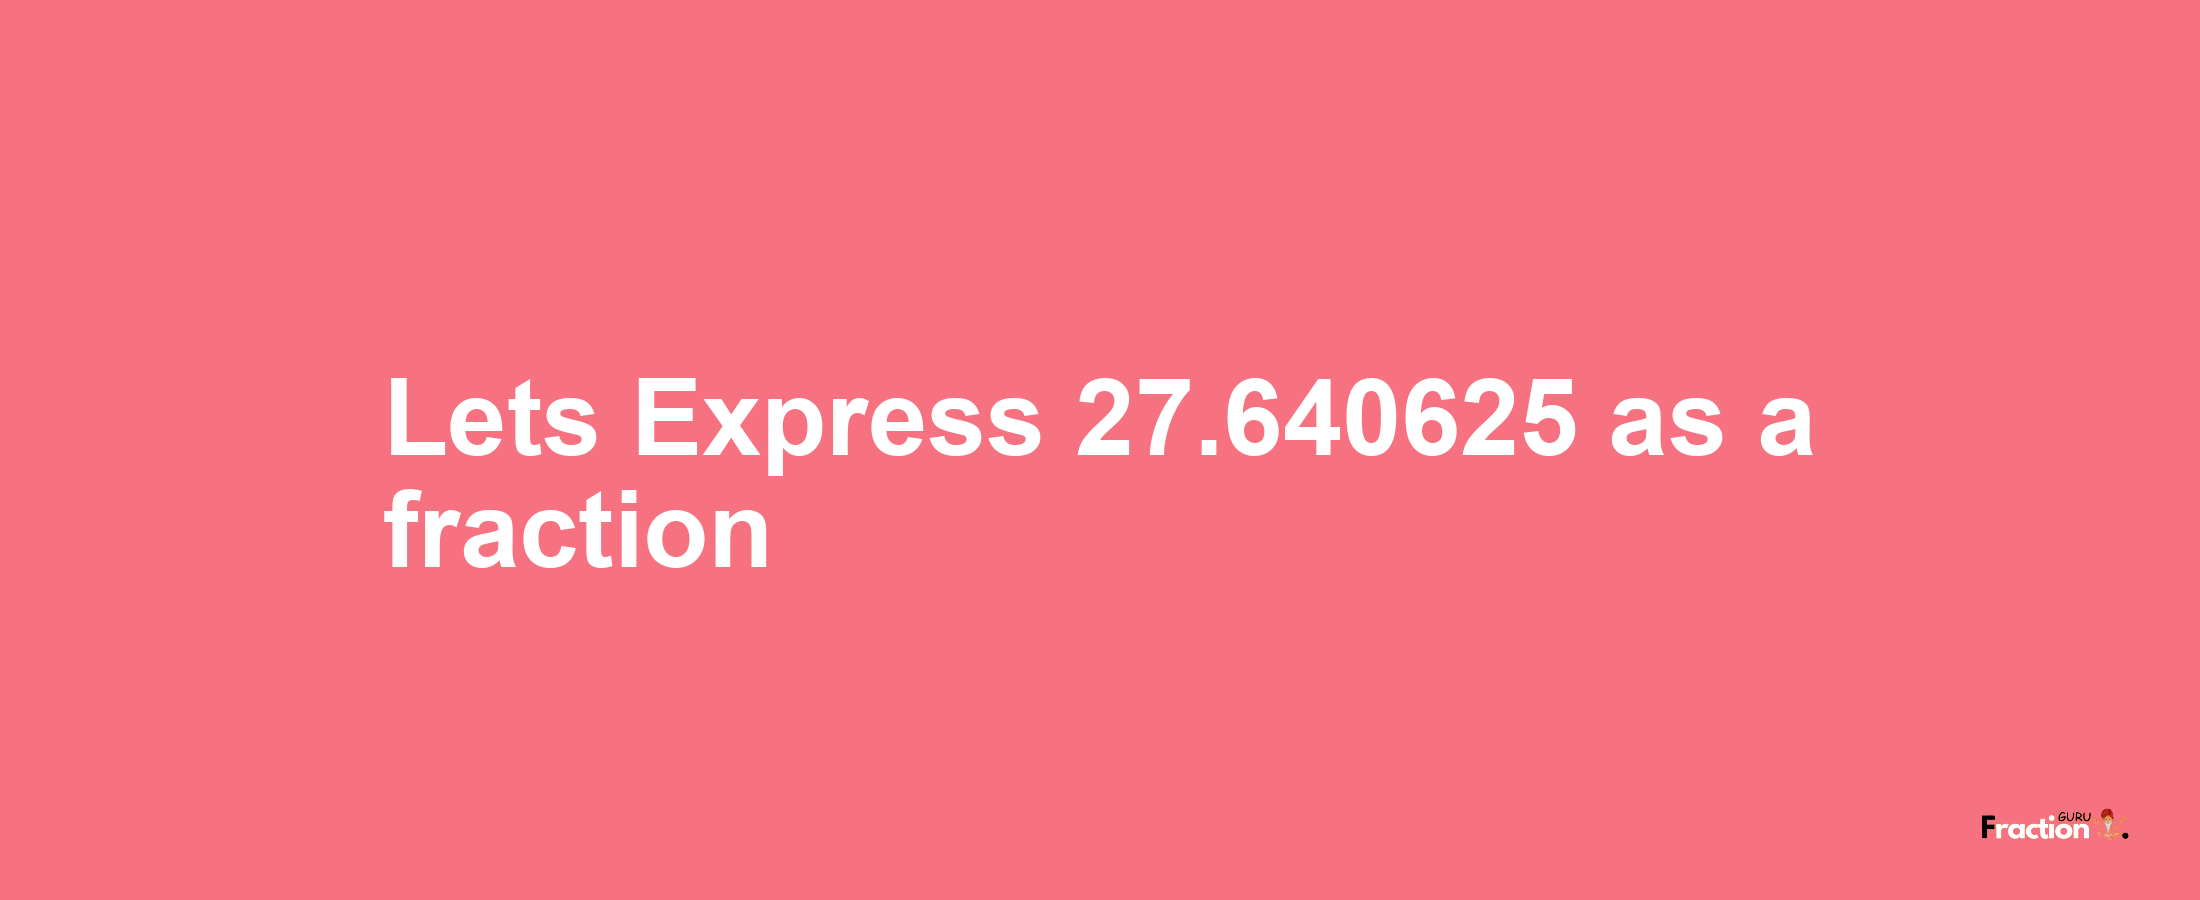 Lets Express 27.640625 as afraction